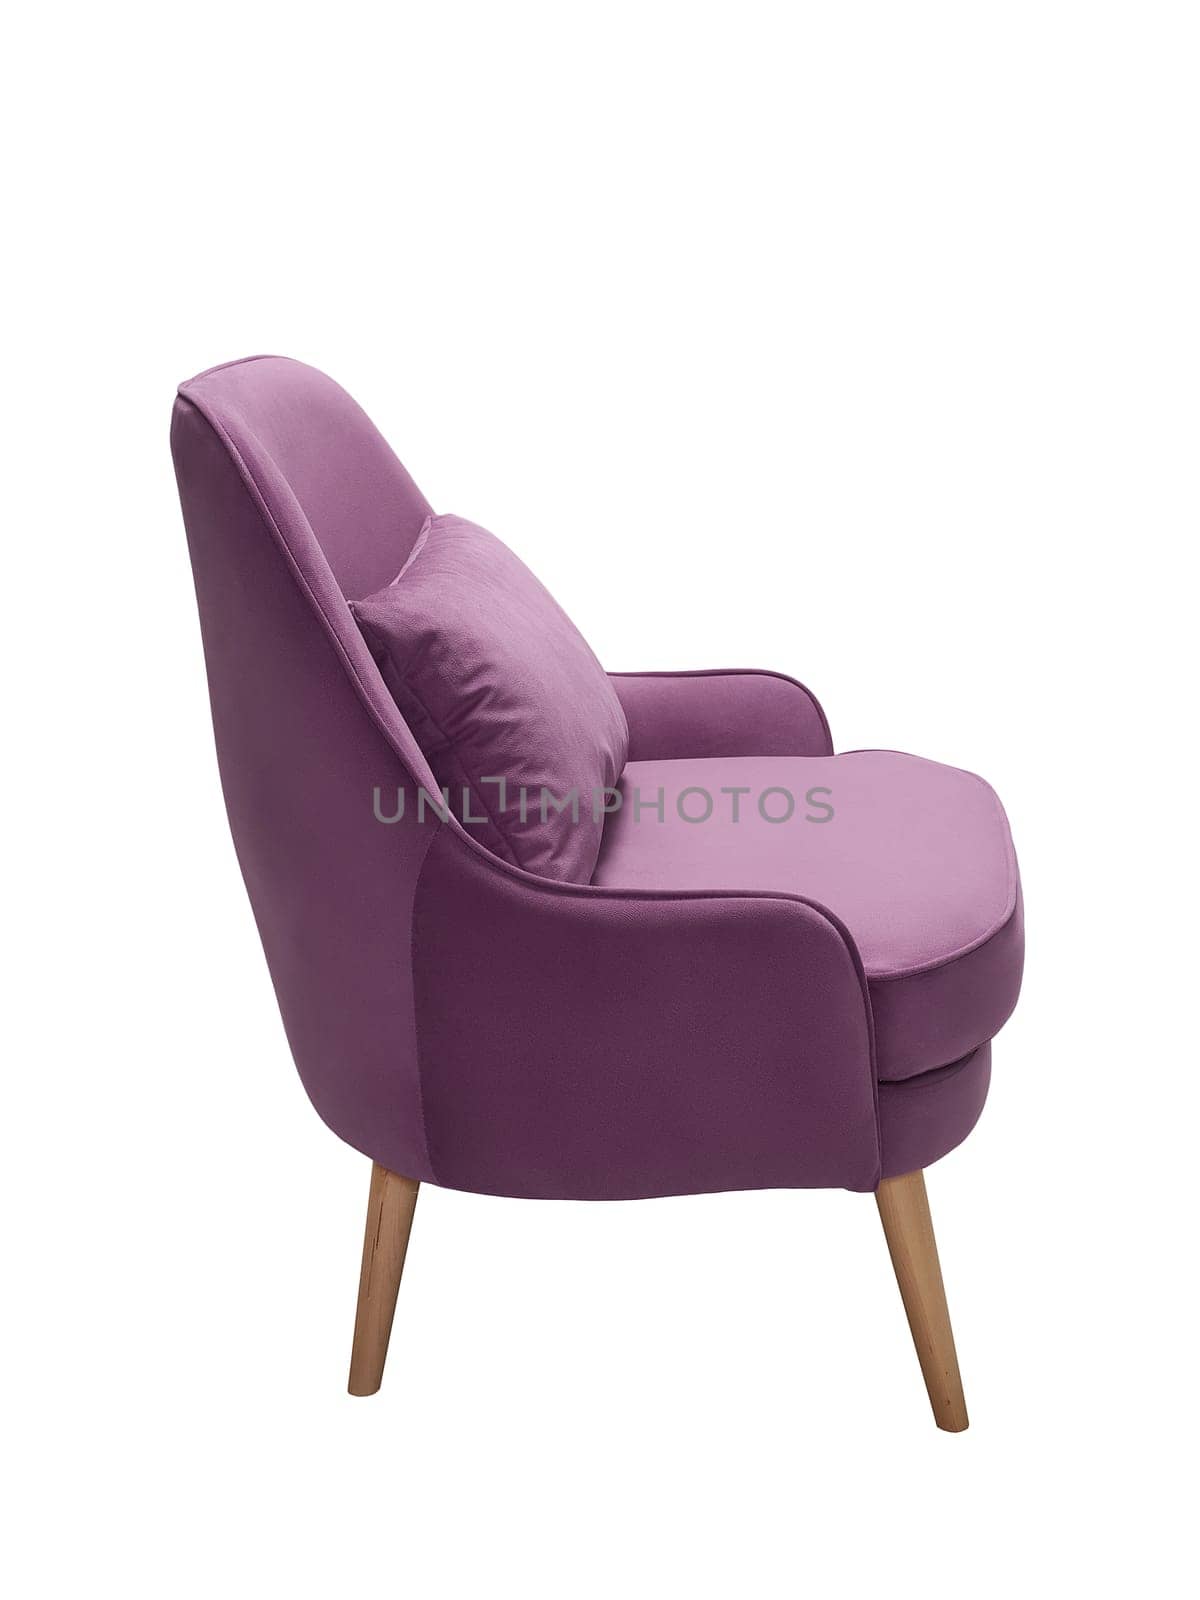 modern purple fabric armchair with wooden legs isolated on white background, side view.